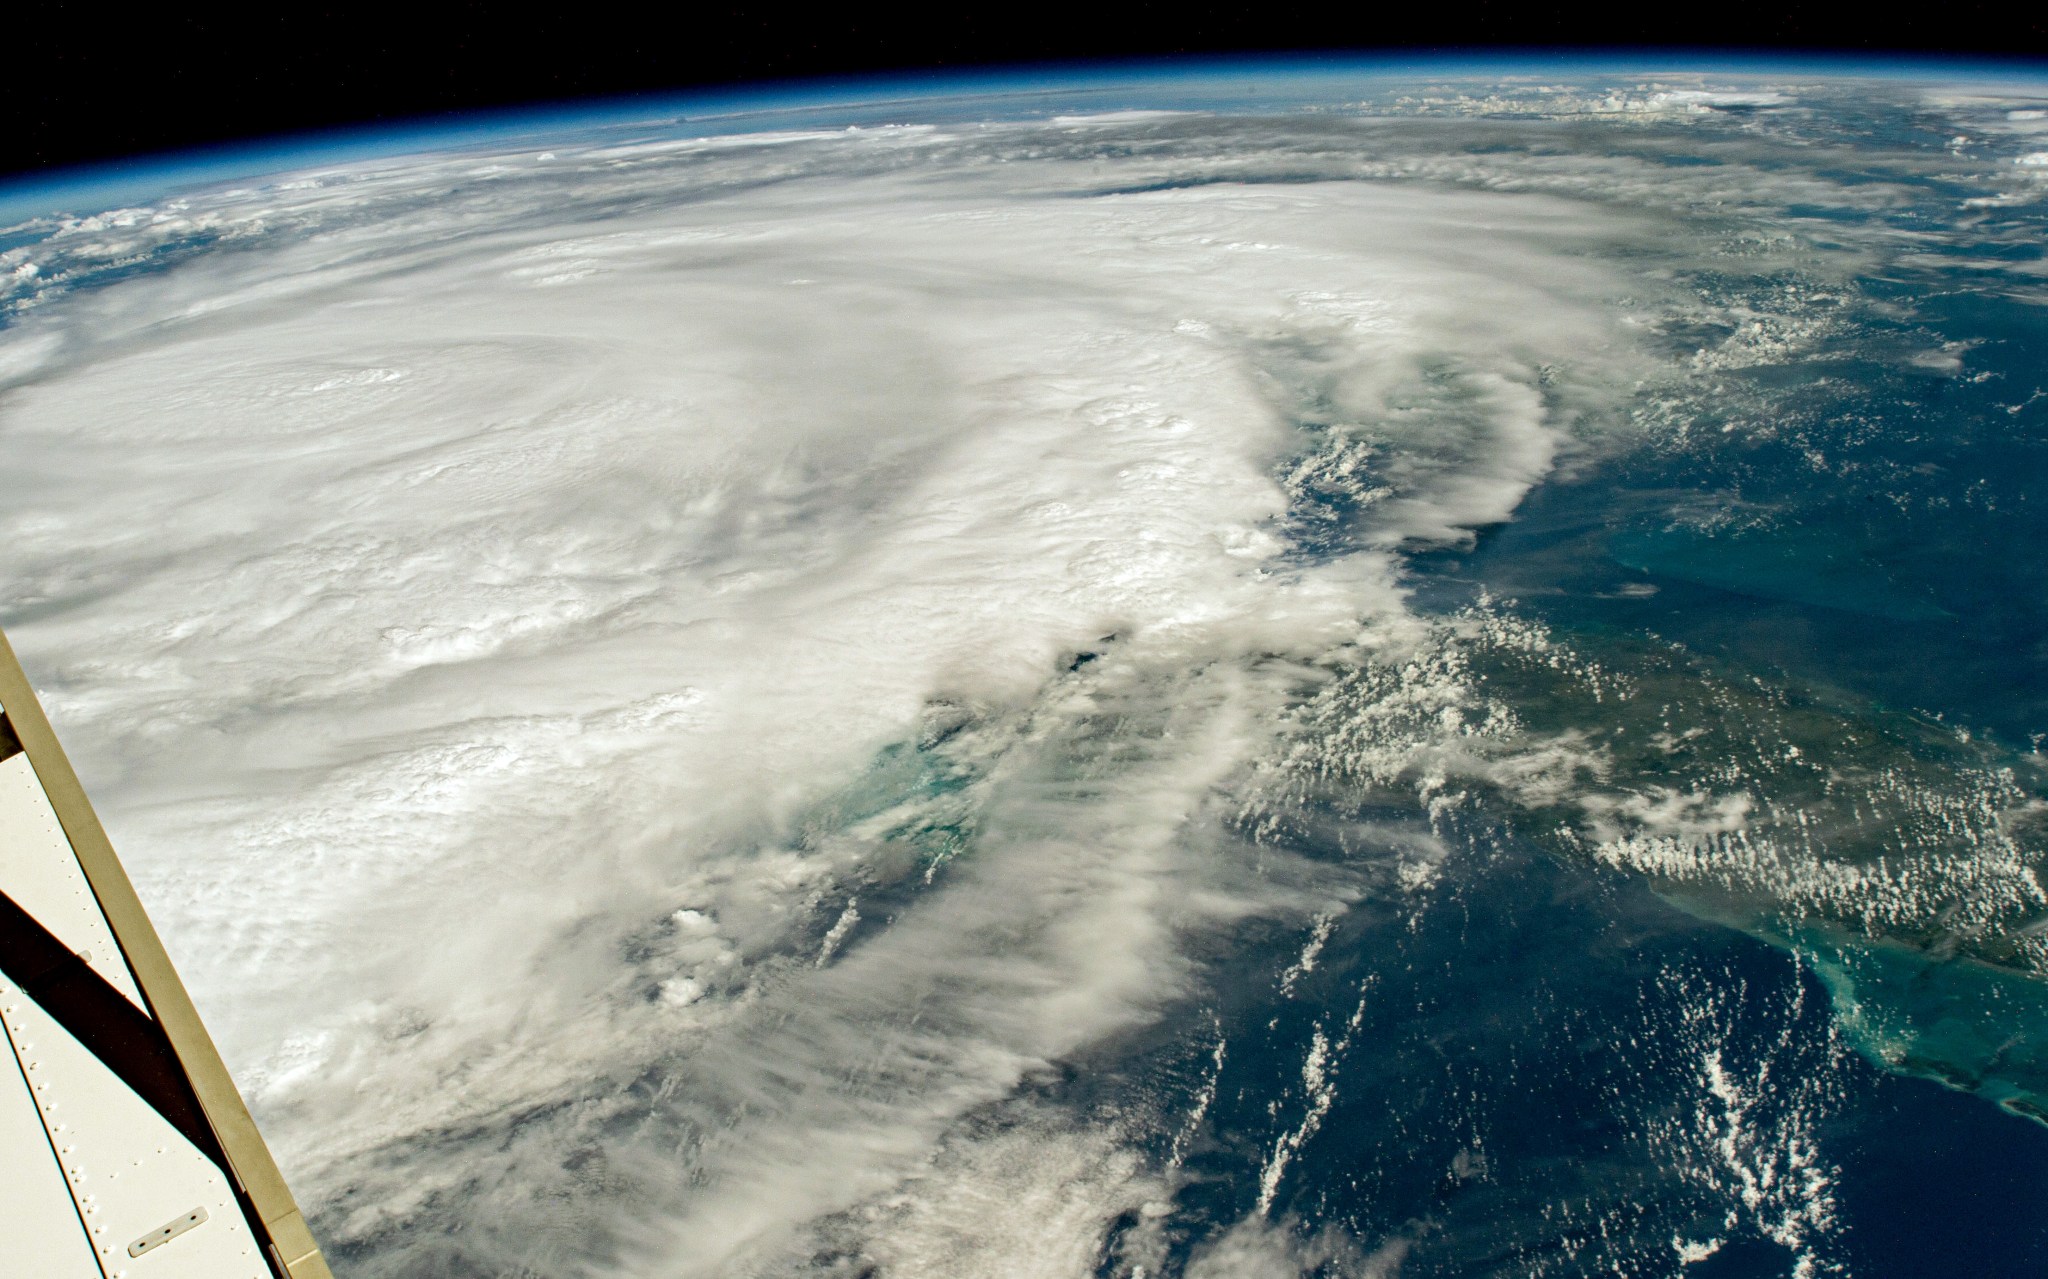 Hurricane Idalia as seen from the International Space Station looks like a huge, sprawling white circular cloud. It dominates the image, with the water of the Gulf of Mexico mostly visible in the bottom right portion of the photo. Also at bottom right is part of Cuba. At top is some of Earth's curvature and at bottom left is part of the space station.